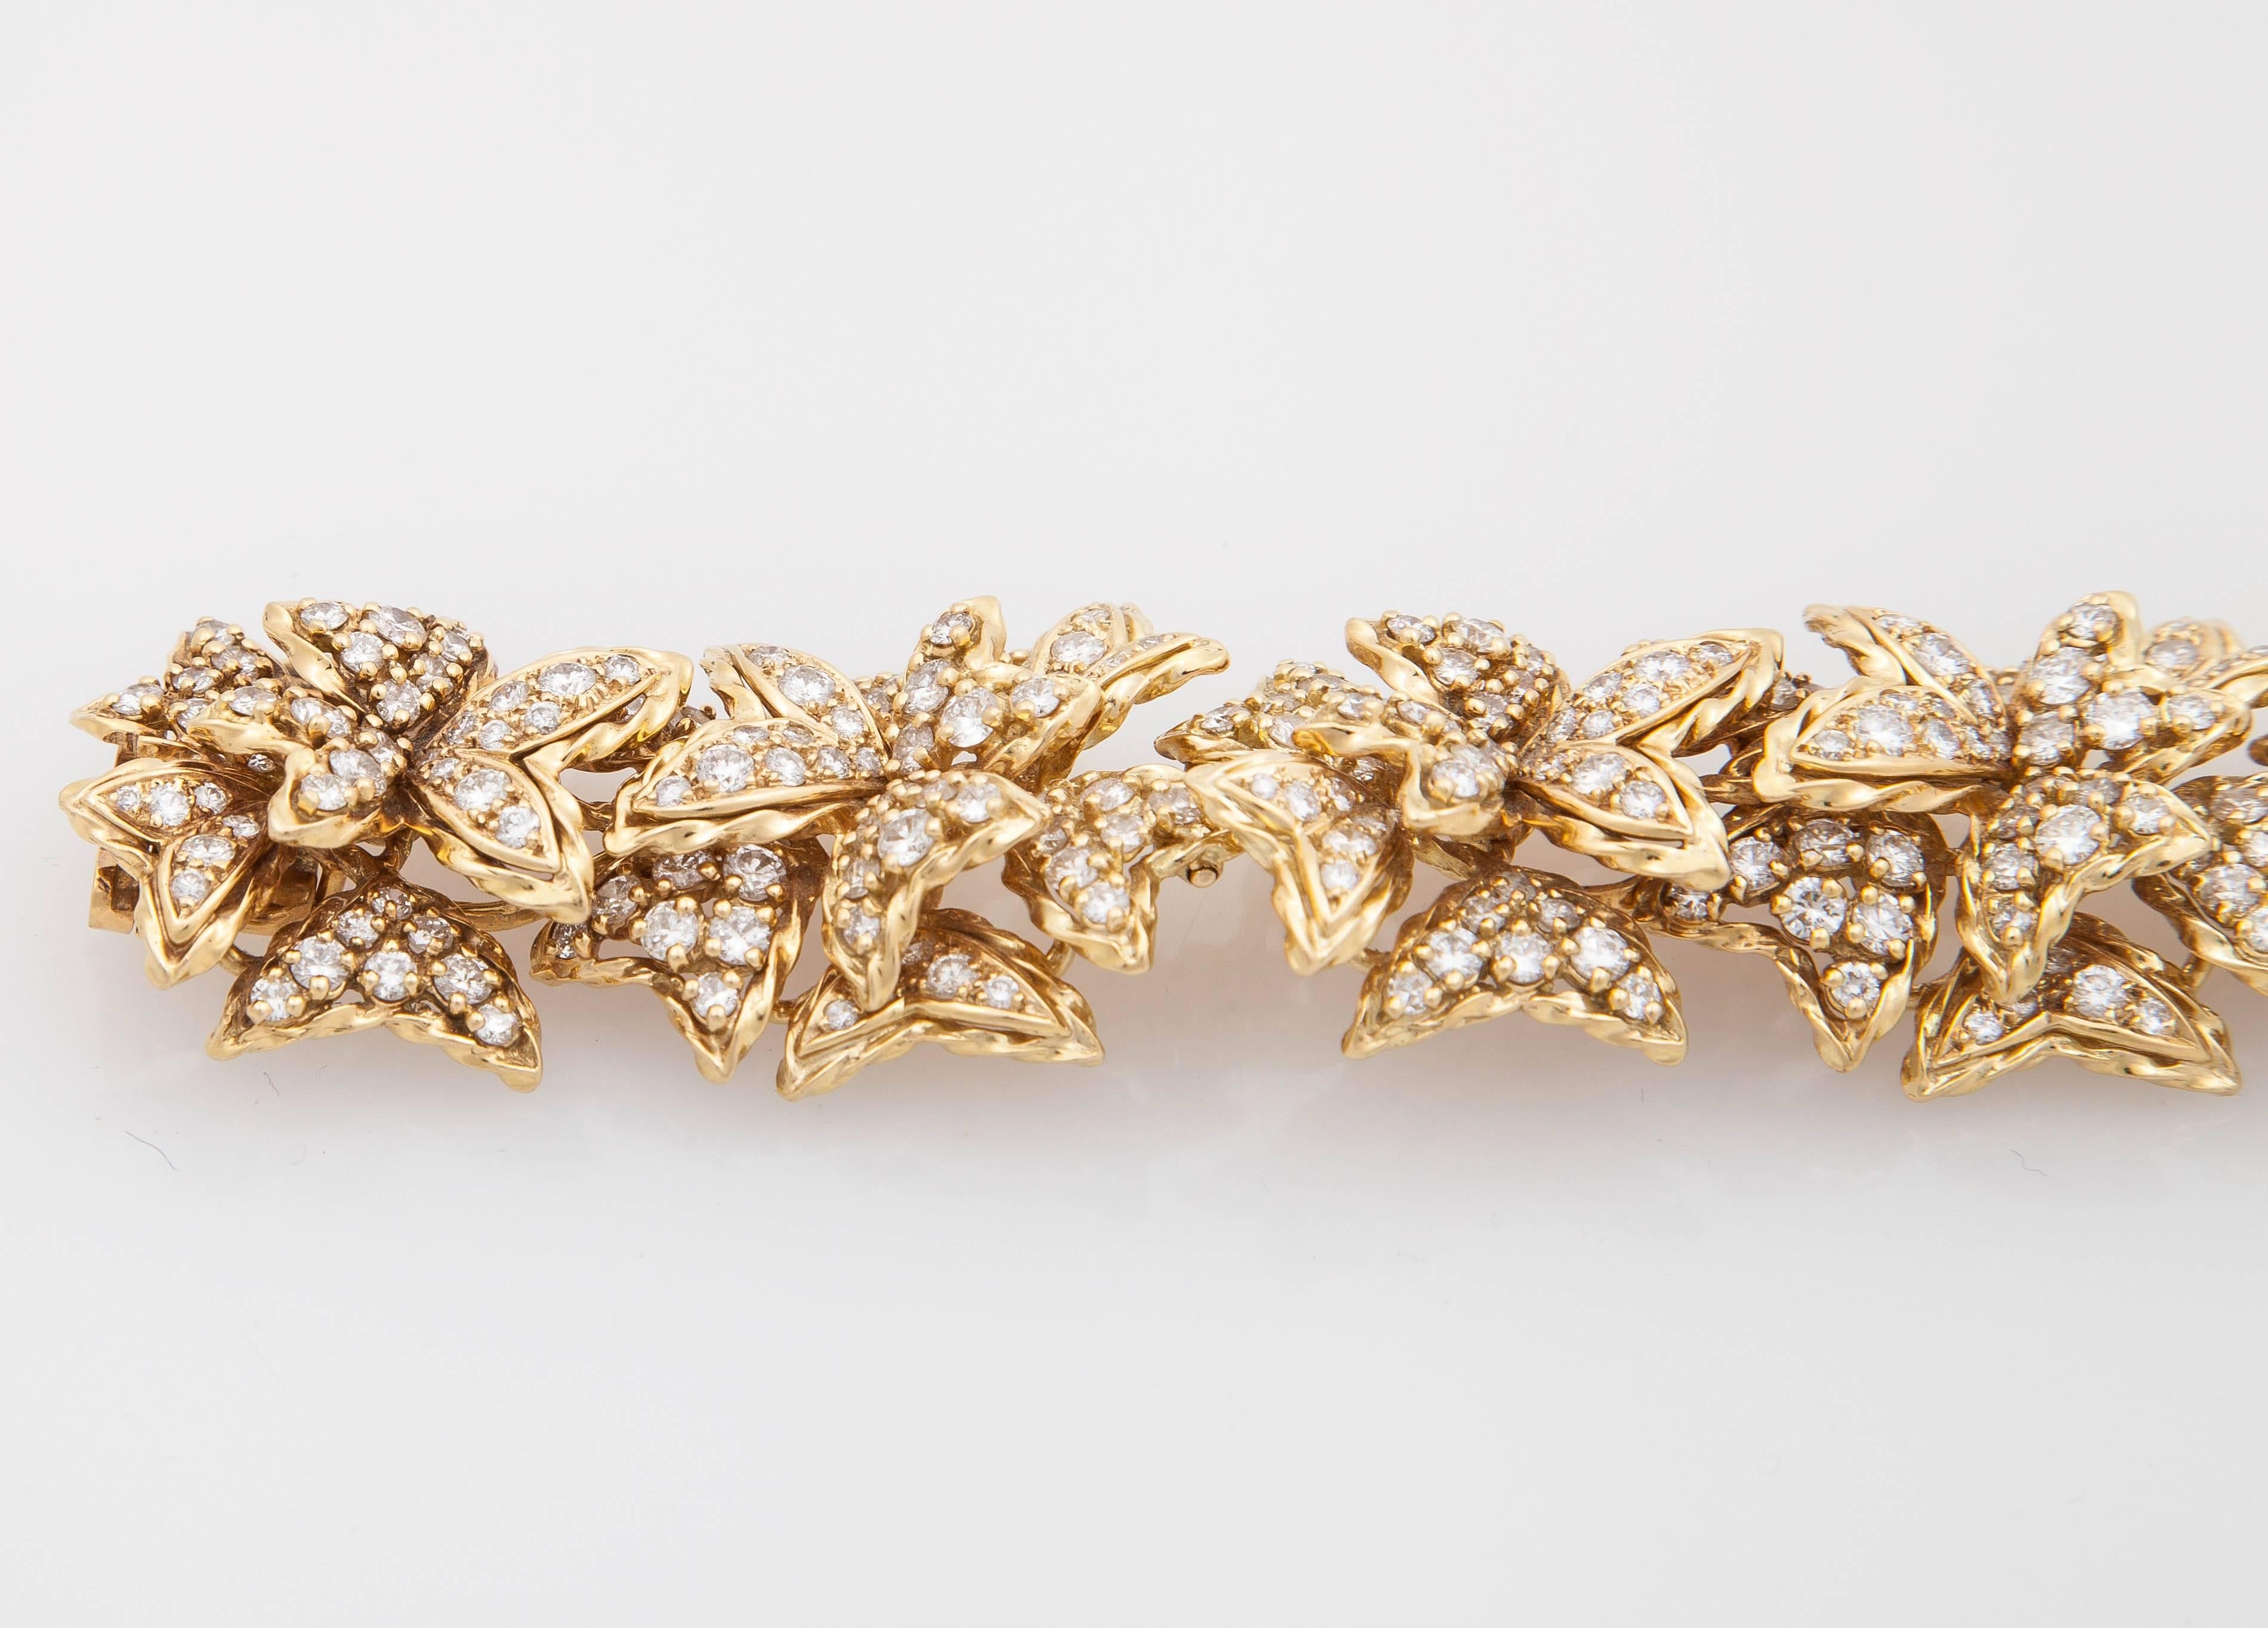 Stunning Hammerman Brothers bracelet designed as a round-shaped brilliant cut diamonds weighing 24.16 carats, mounted in 18k yellow gold.